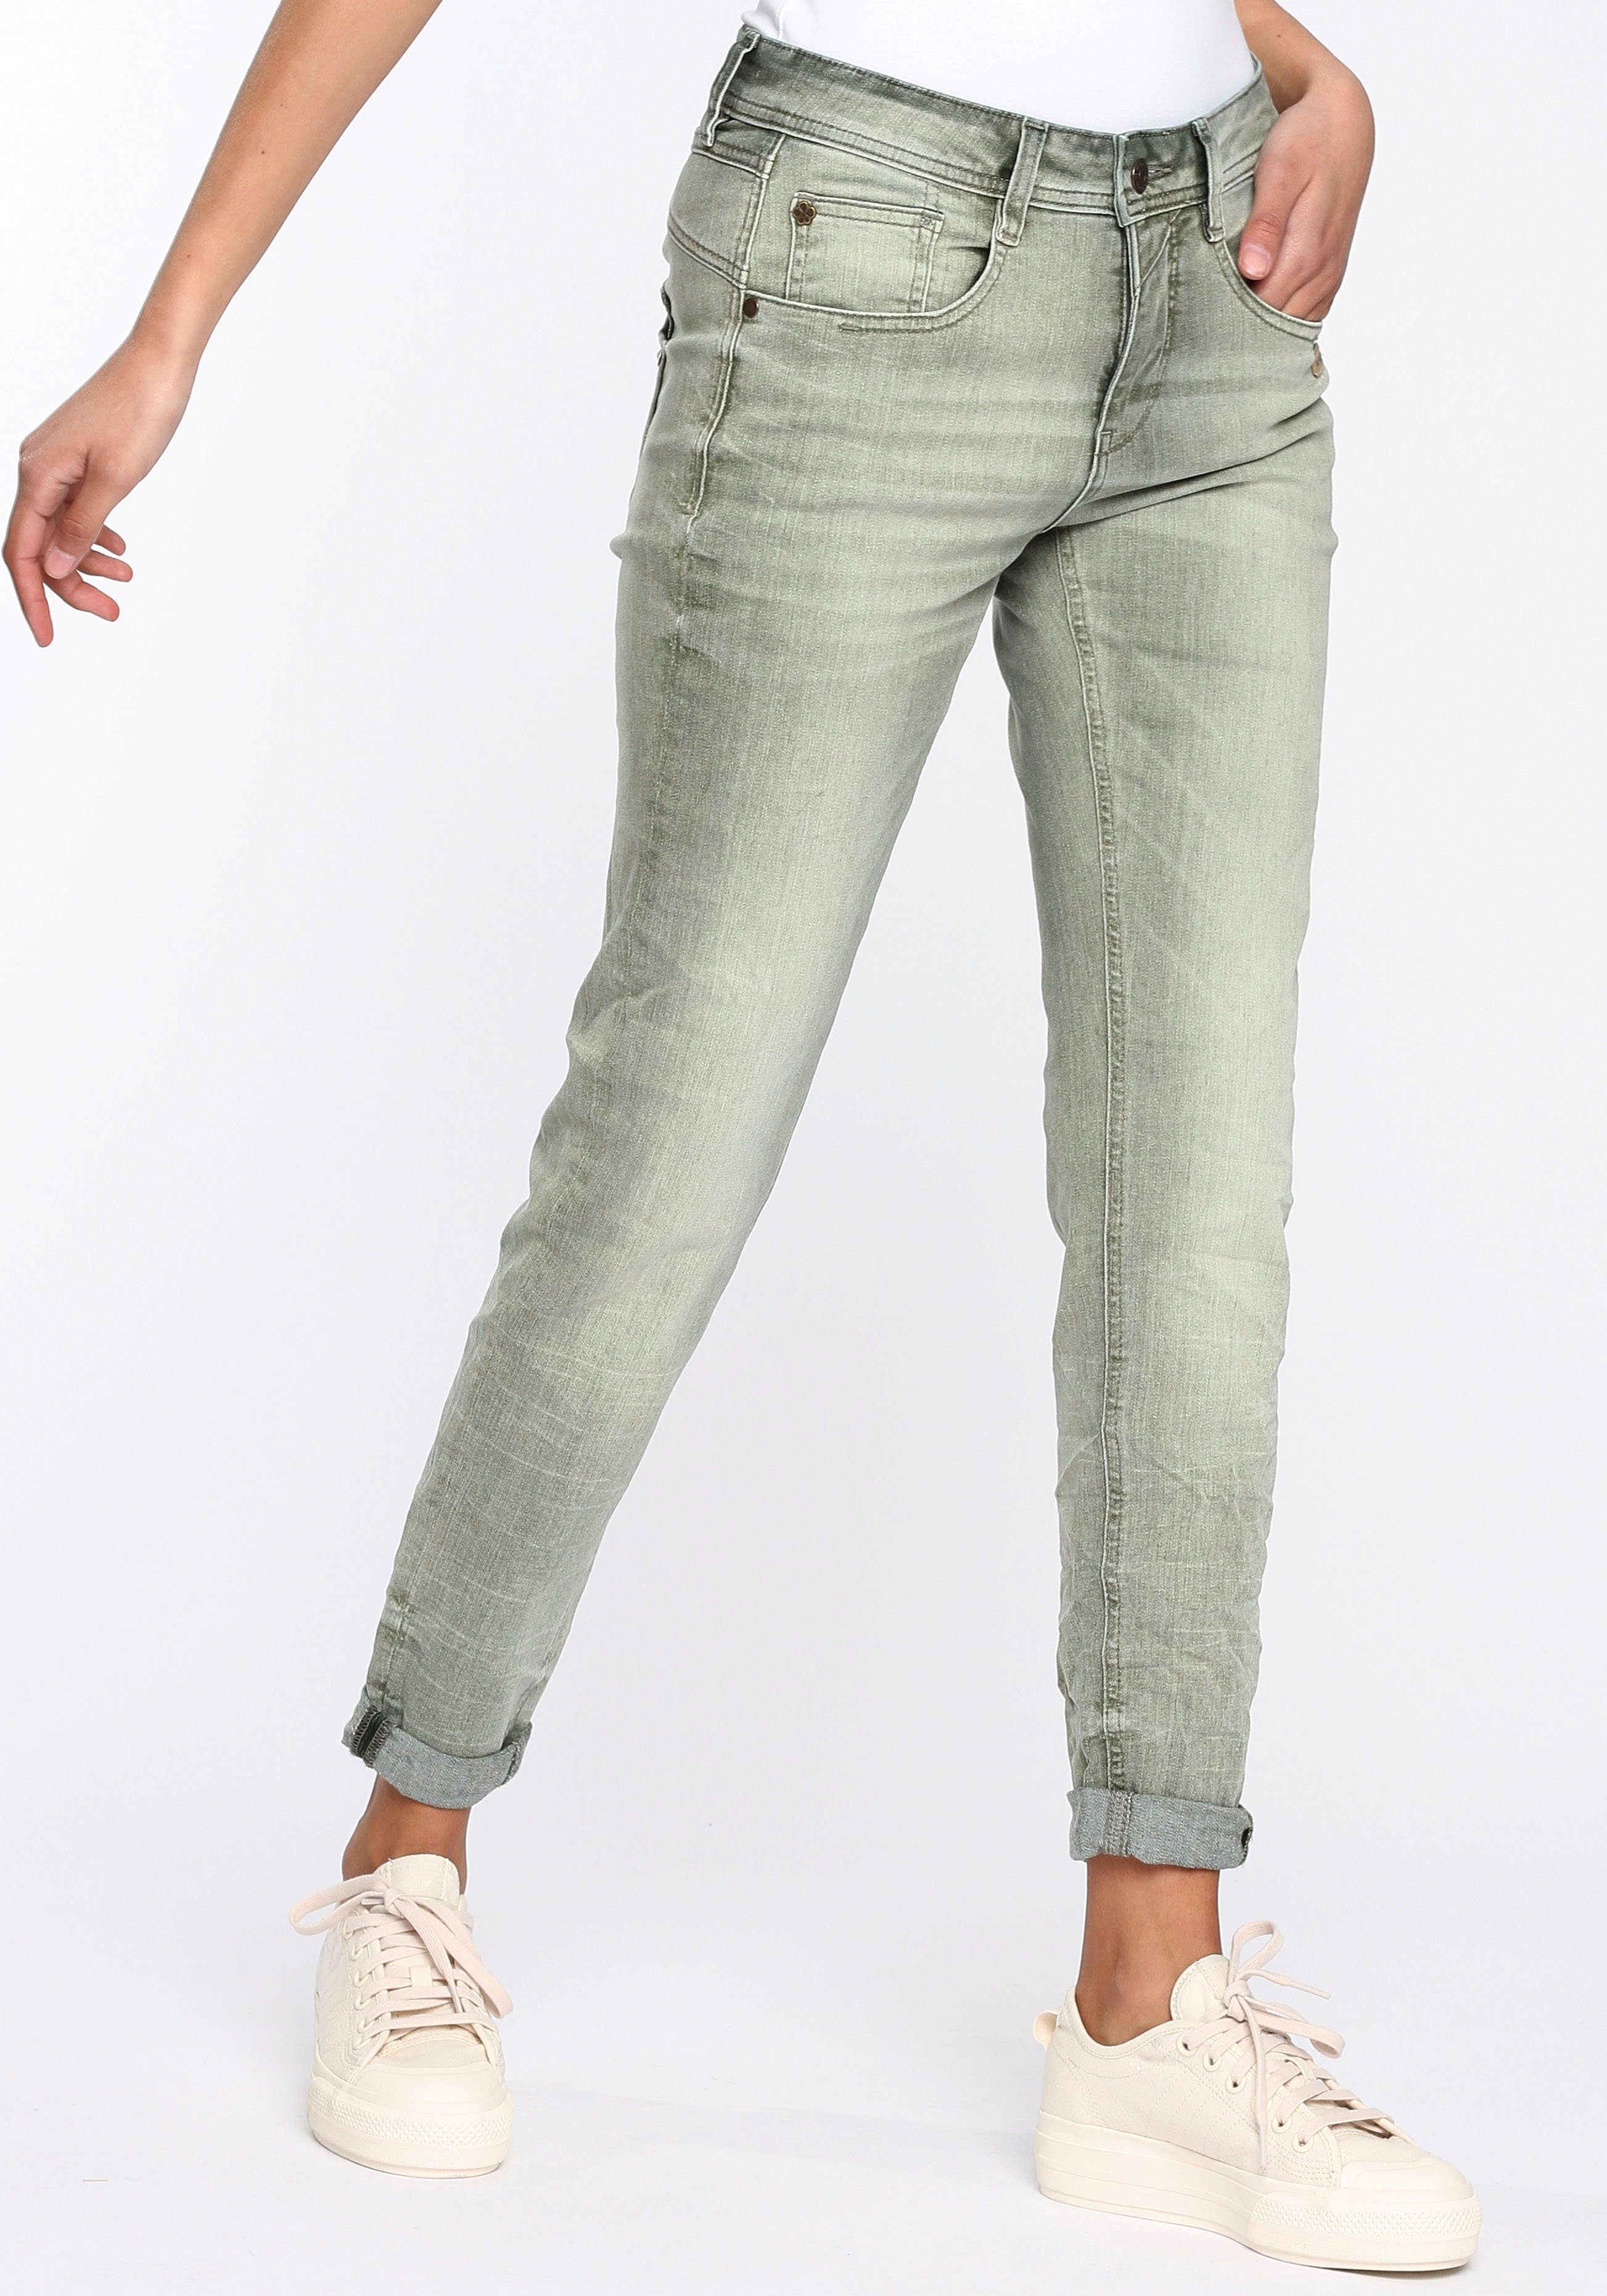 washed down GANG used) 94AMELIE Elasthan-Anteil (grey durch Relax-fit-Jeans perfekter Sitz